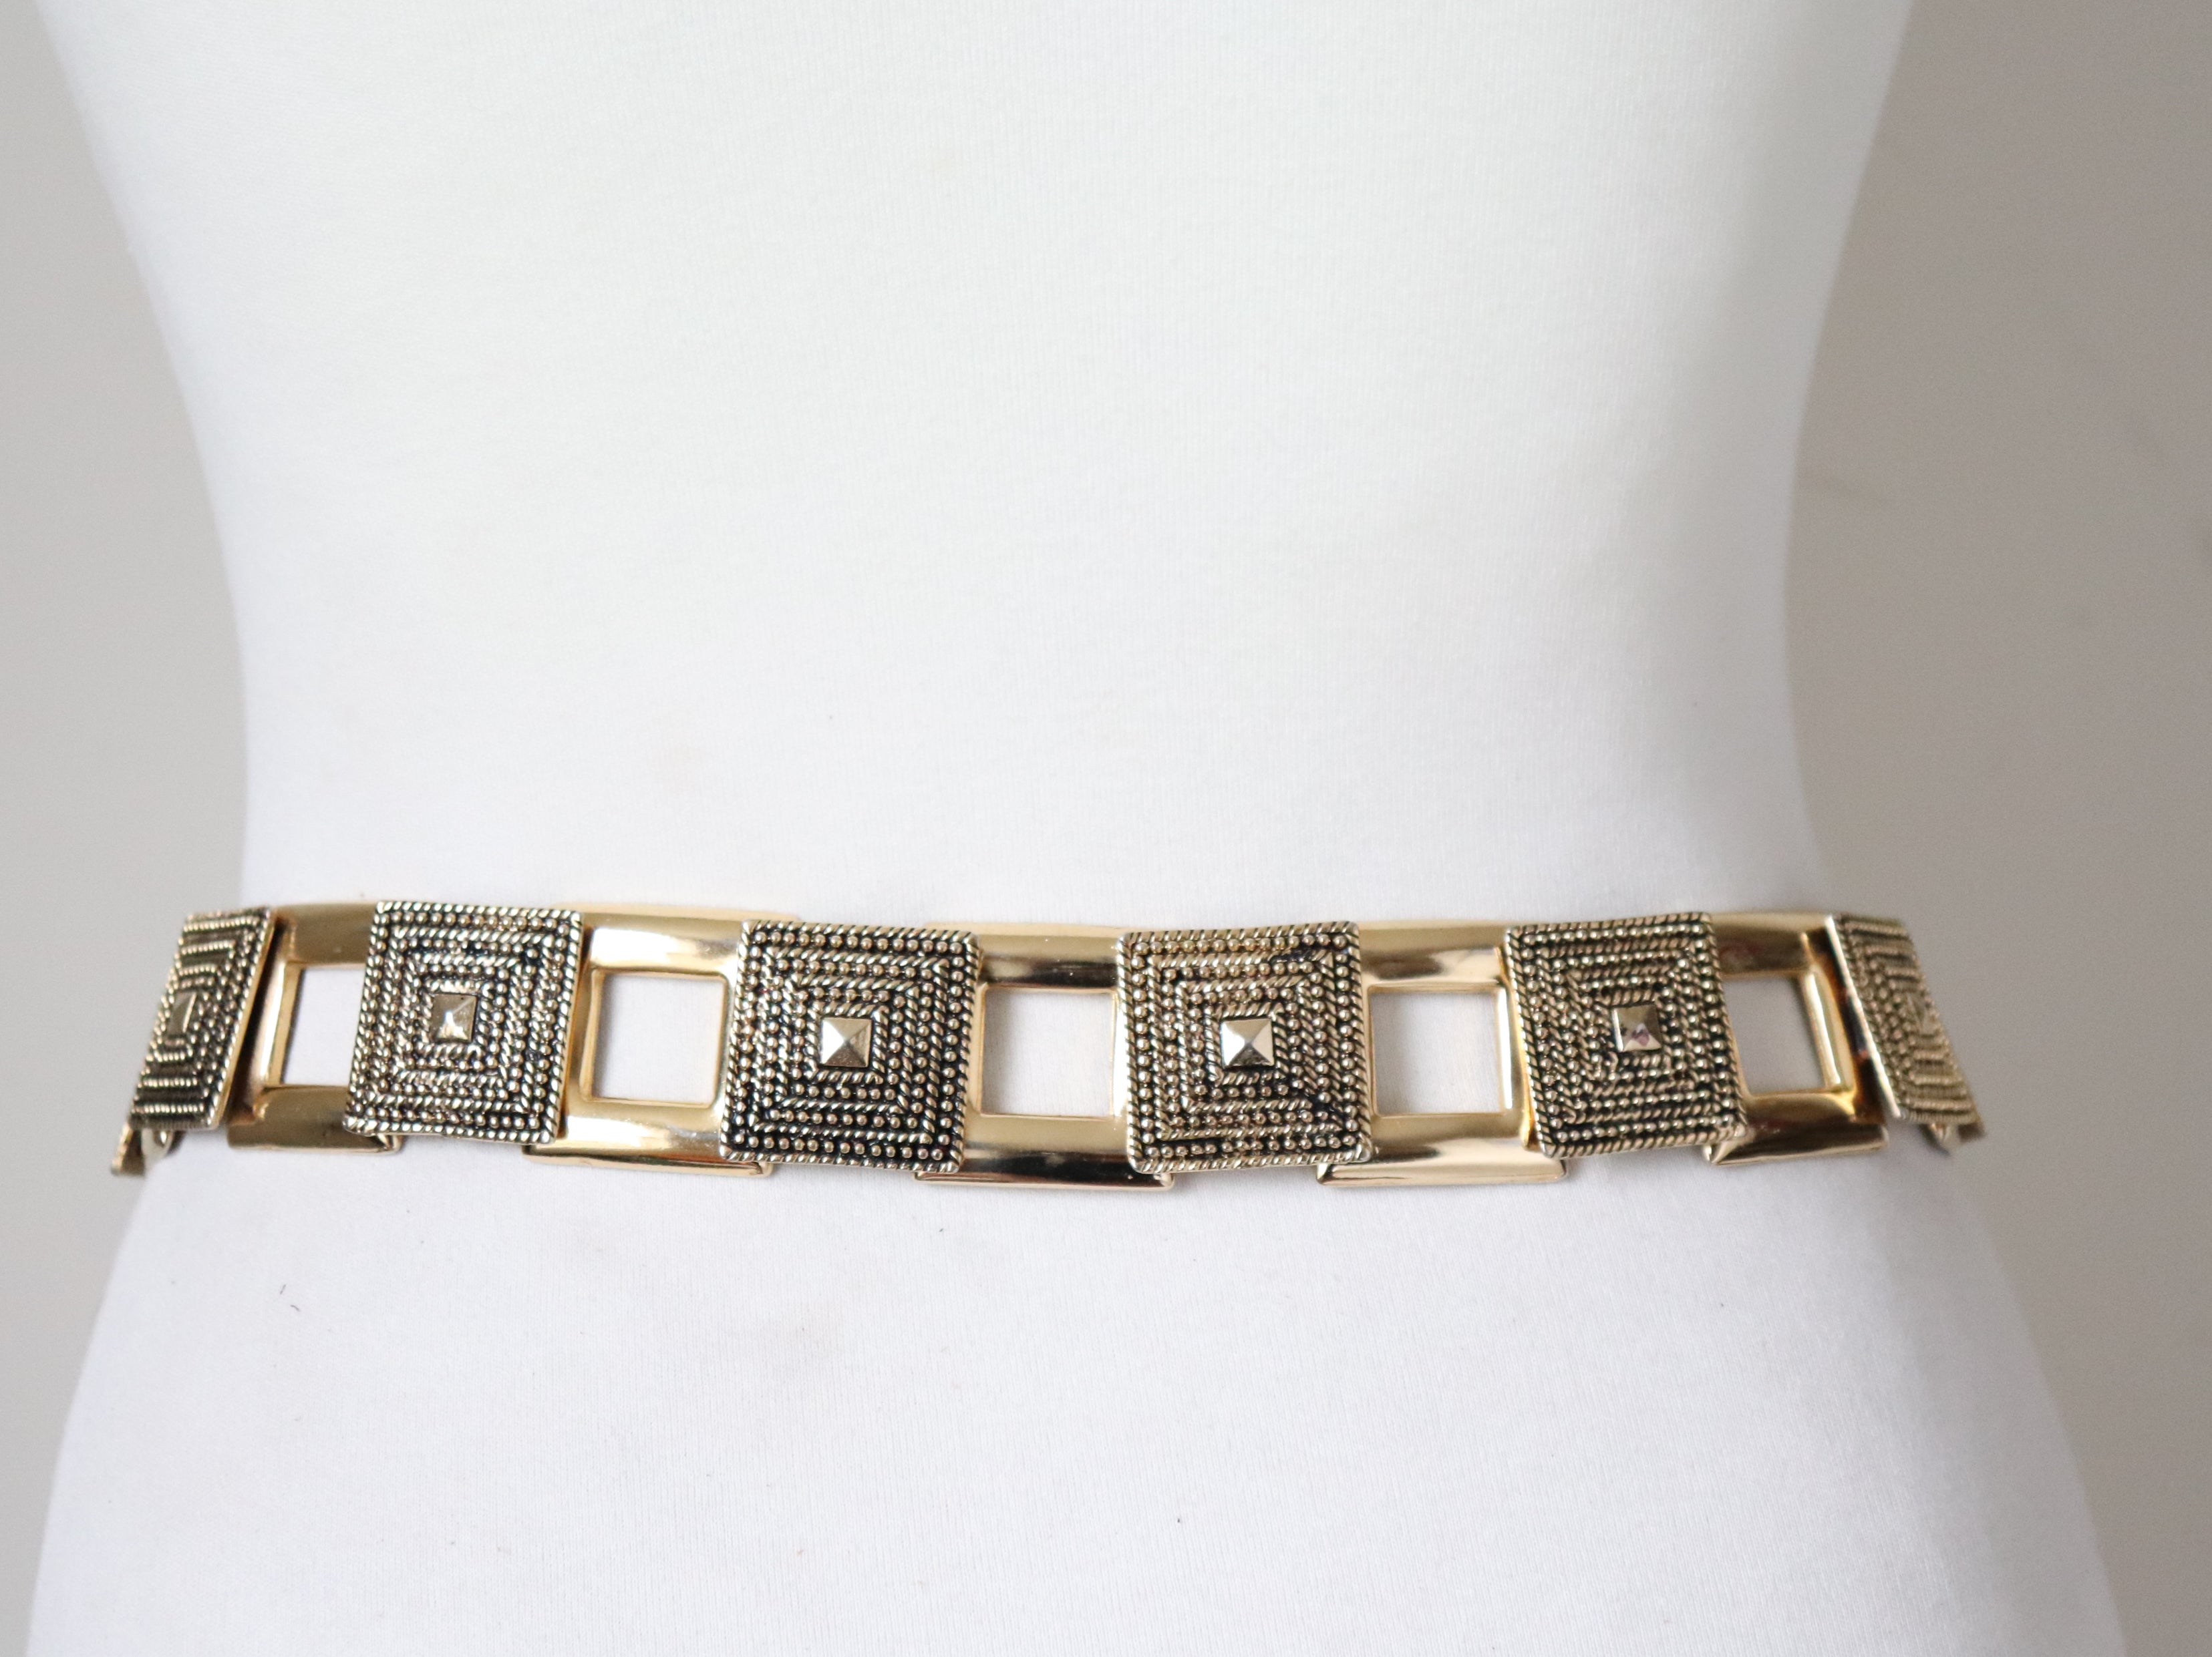 Vintage 1980s Brown Leather and Metal Chain Belt ( Gold Tone ) - X Small